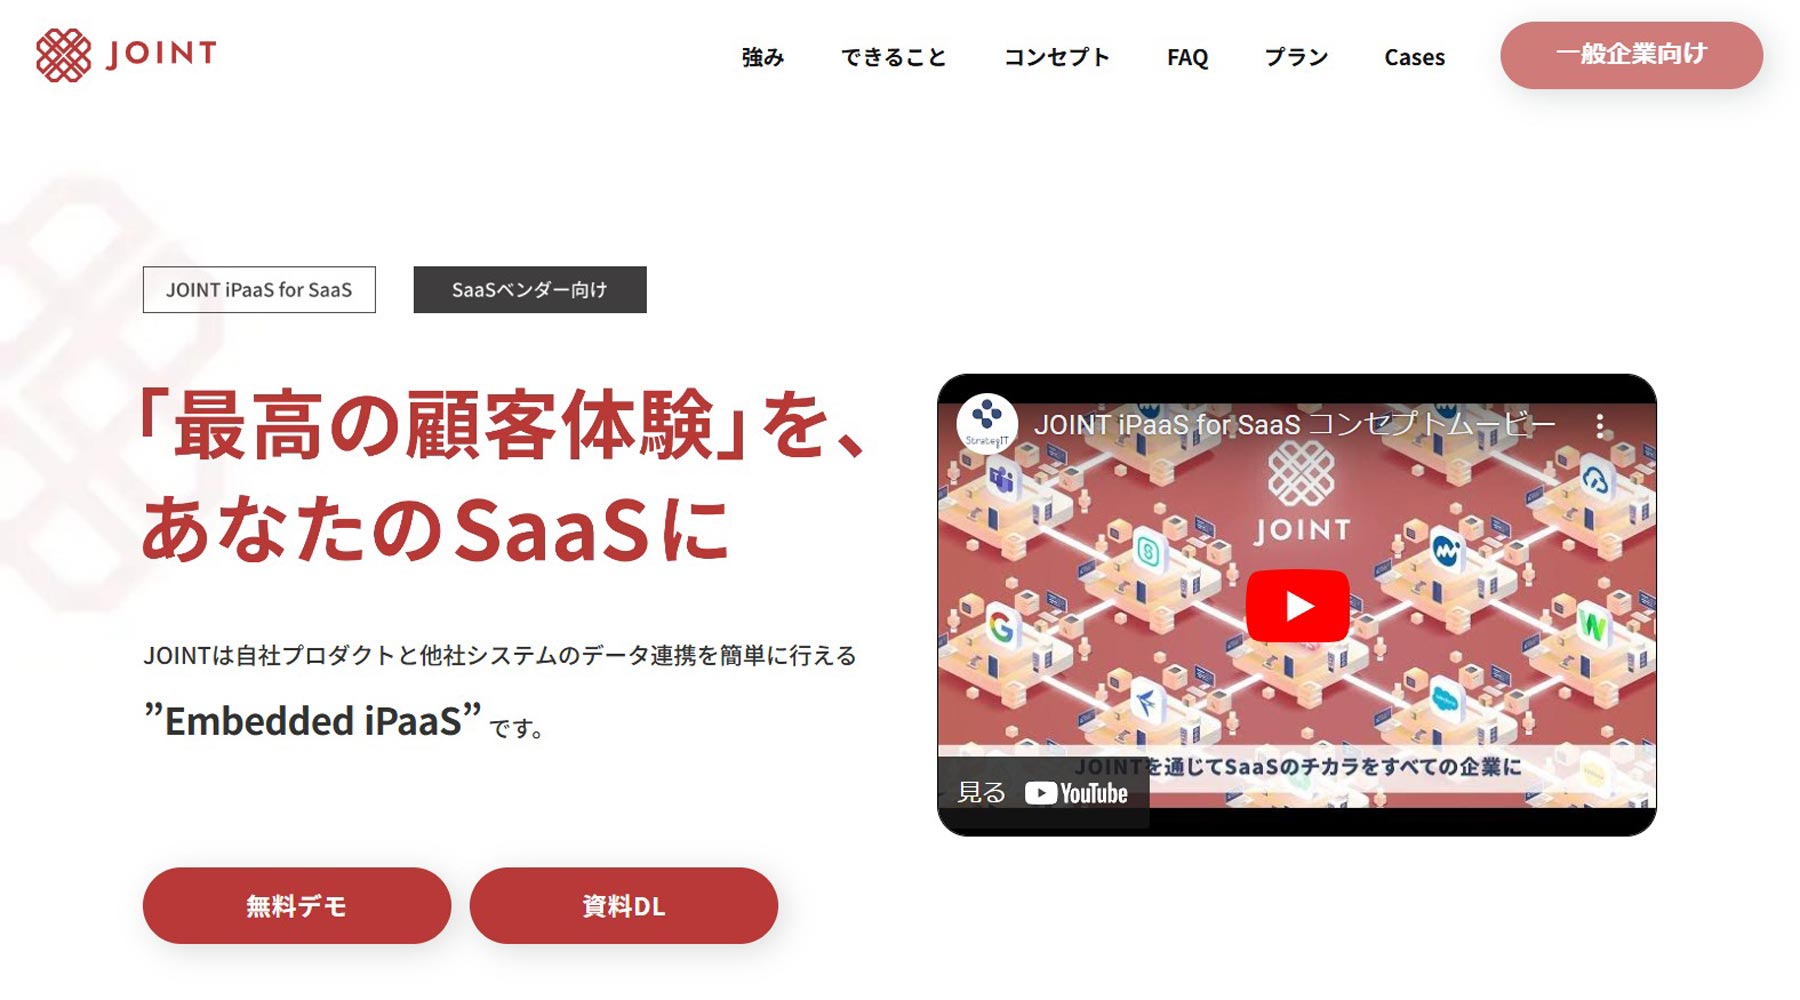 JOINT iPaaS for SaaS公式Webサイト